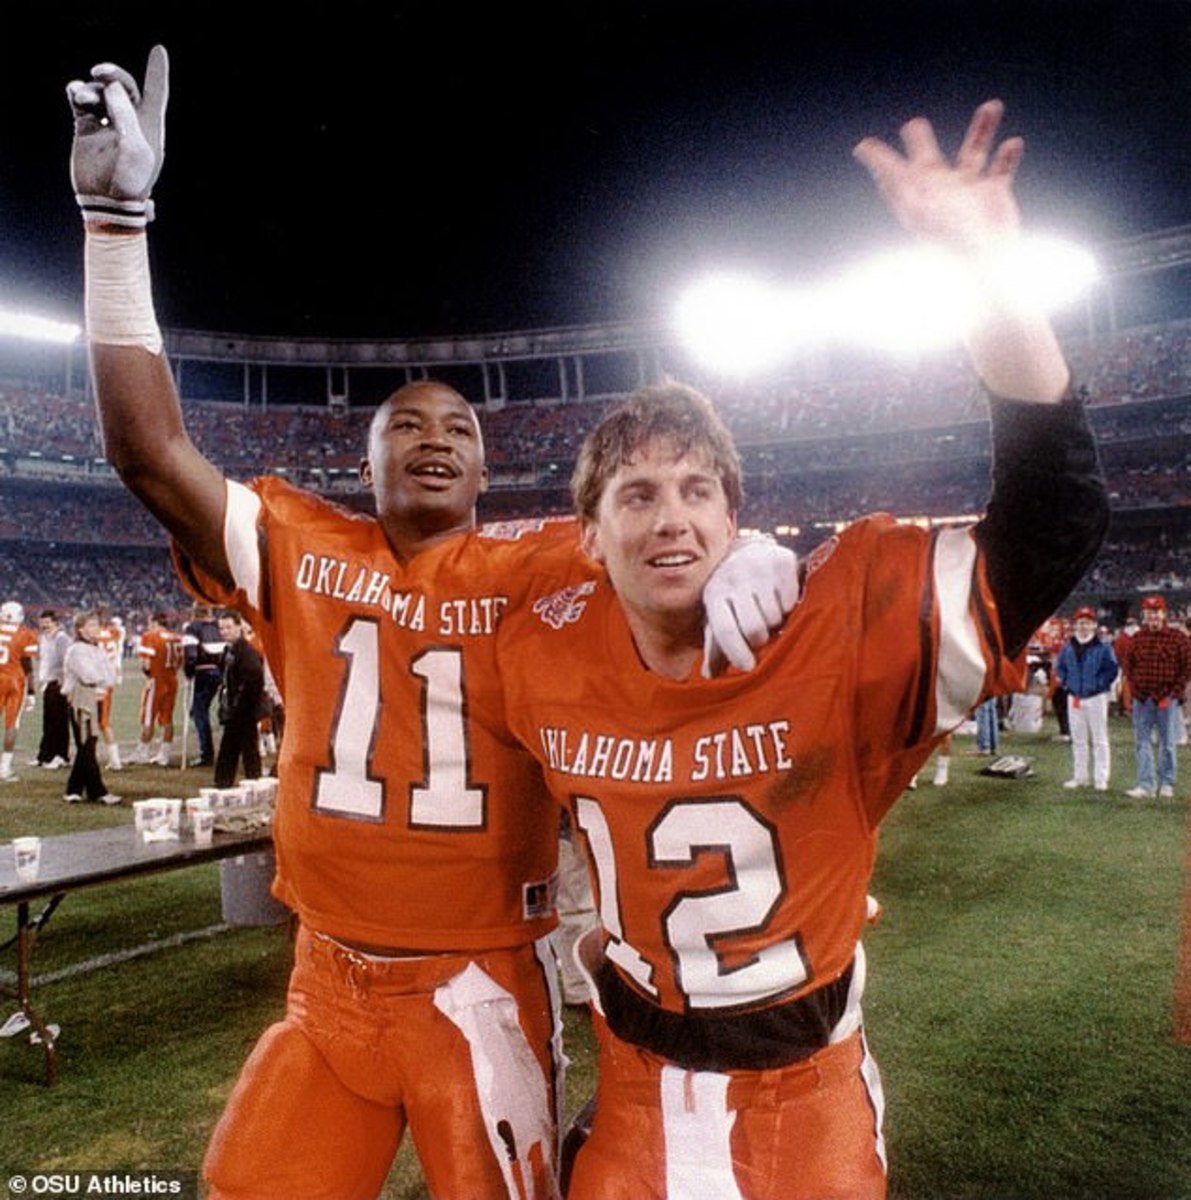 Dykes and Gundy posed for this iconic picture in the late moments of the 62-14 1988 Holiday Bowl win over Wyoming.  